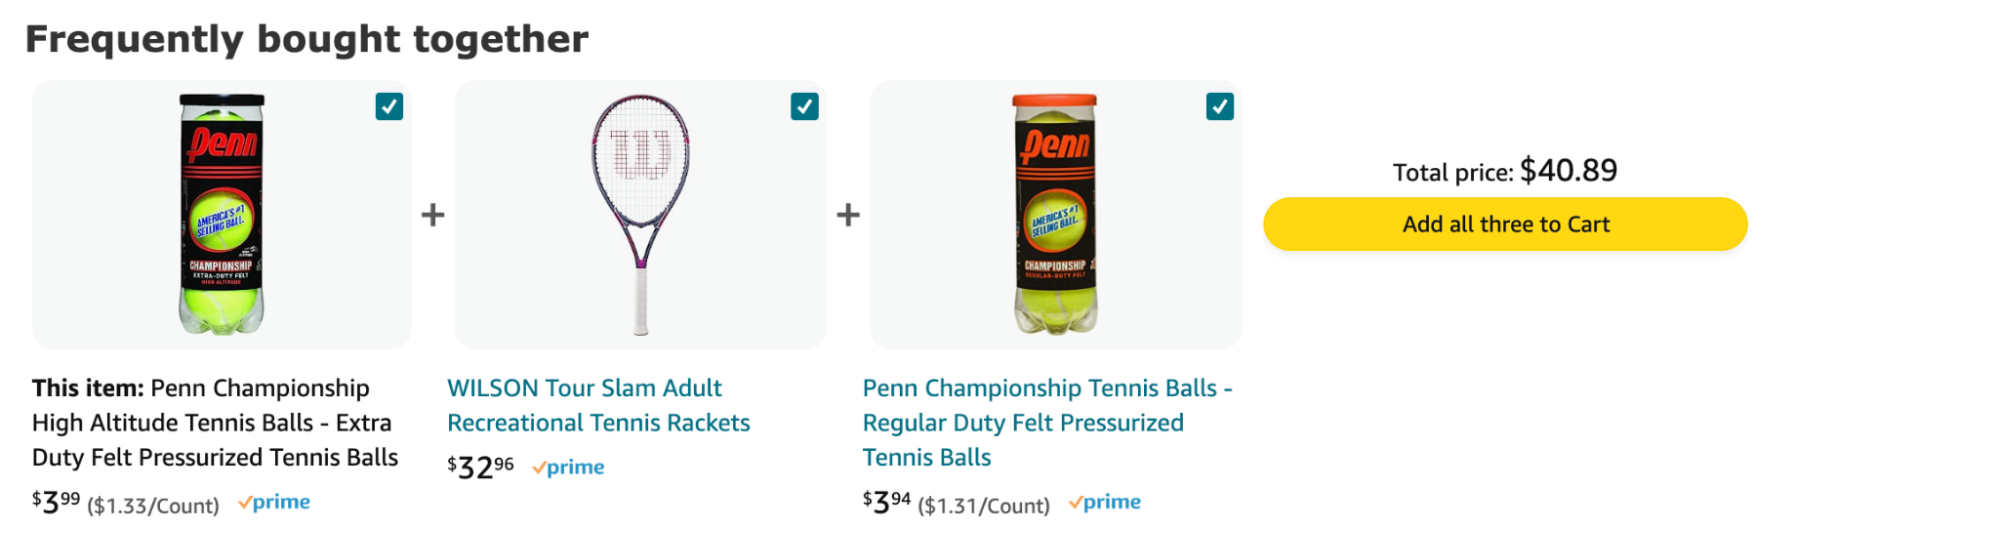 Ecommerce "frequently bought together" example showing tennis balls